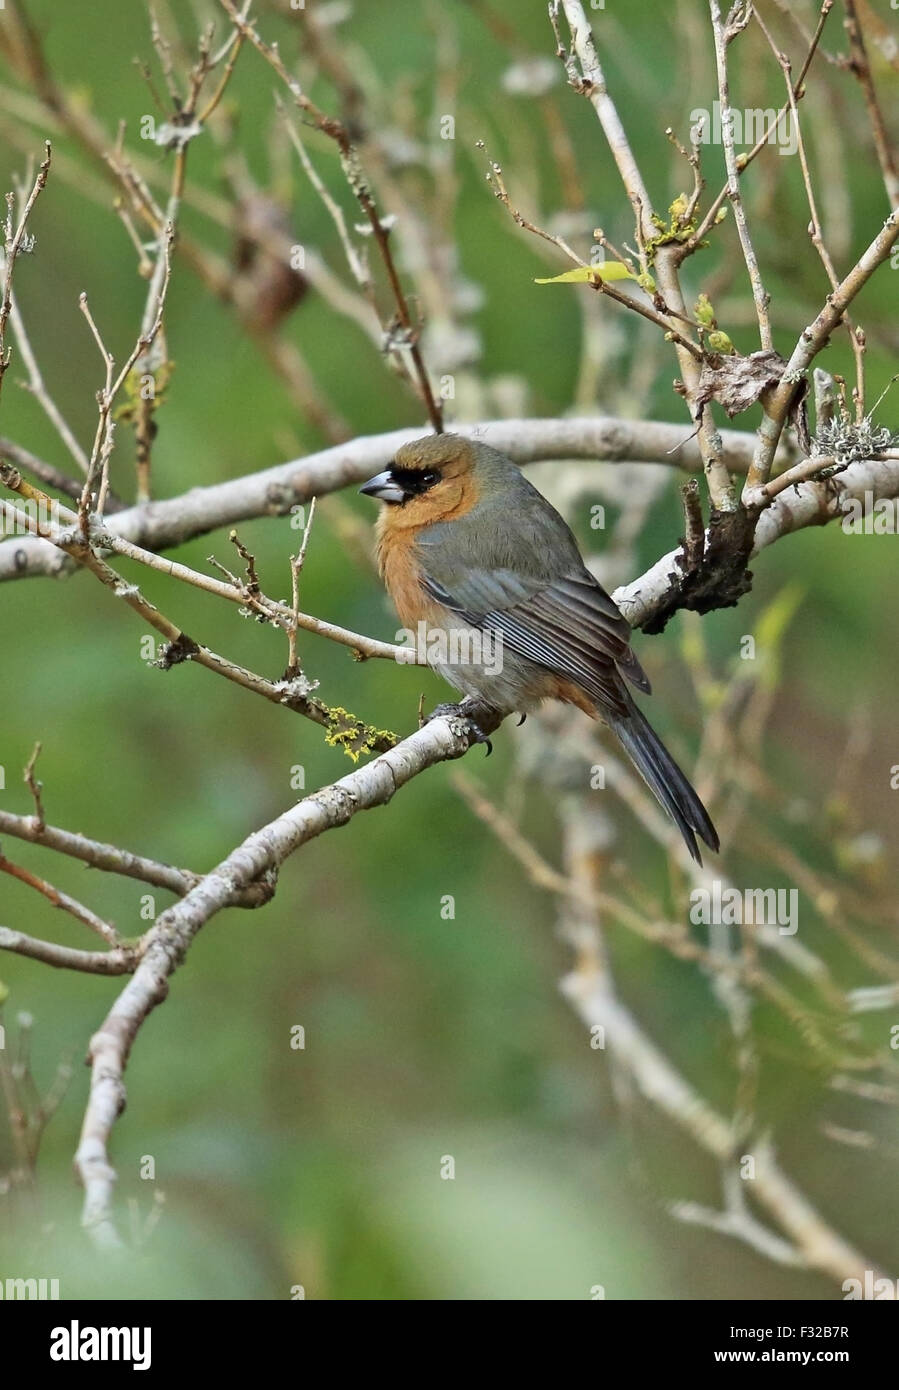 Cinnamon Tanager (Schistochlamys ruficapillus ruficapillus) adult, perched on twig, Atlantic Rainforest, Brazil, June Stock Photo